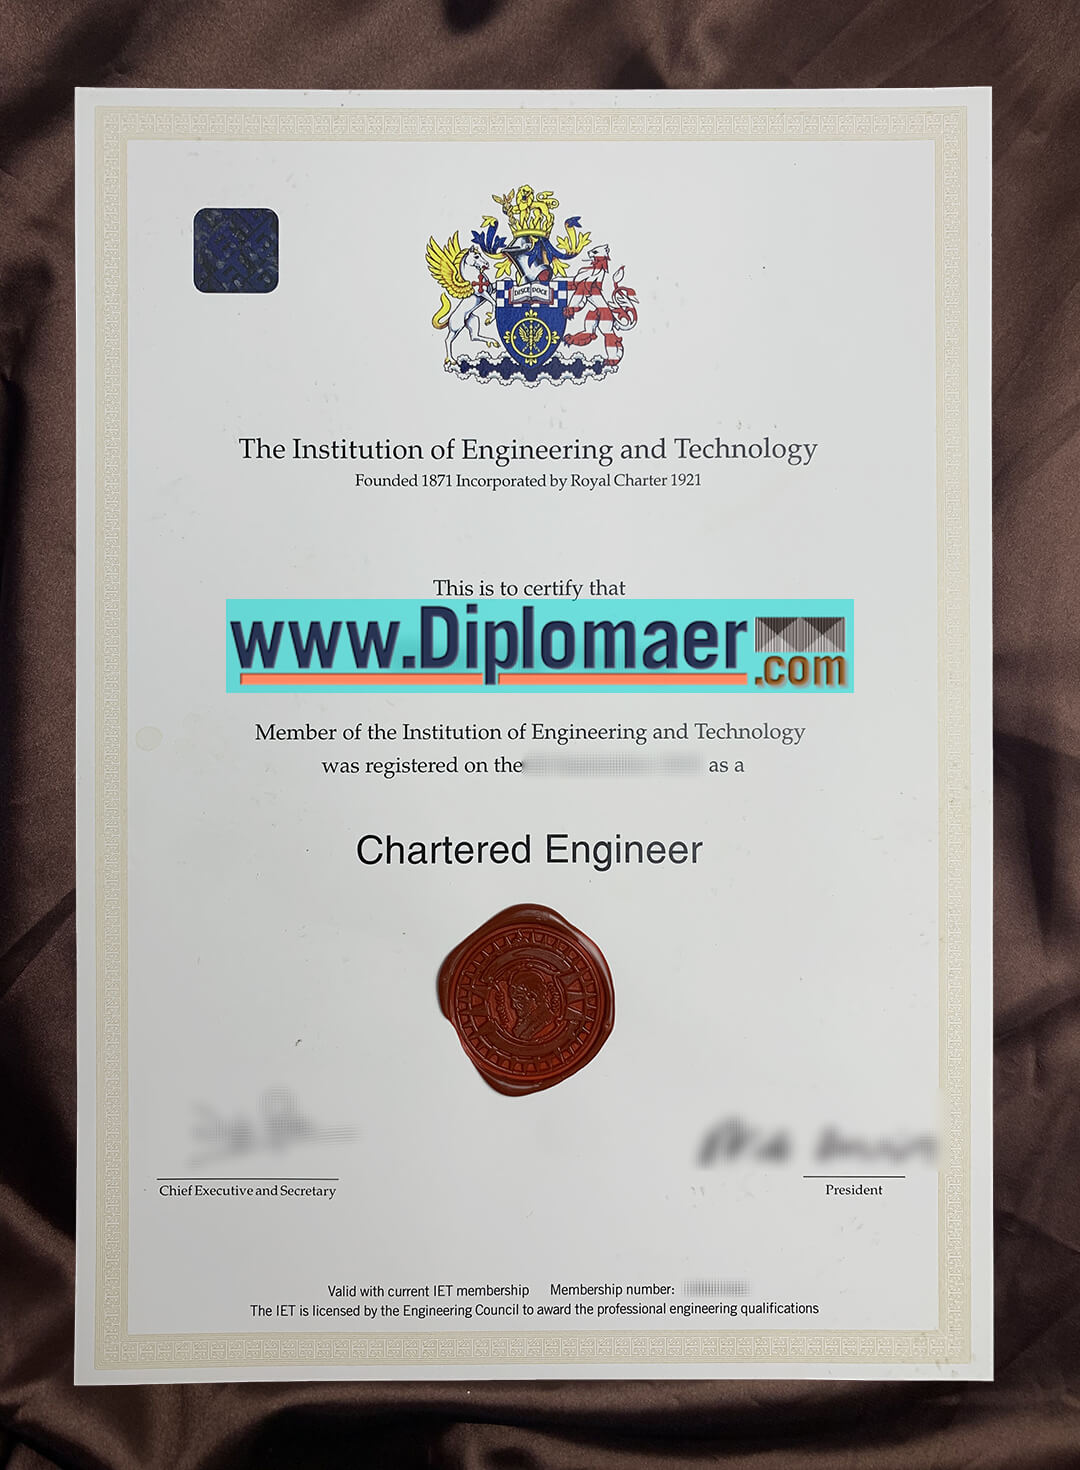 Institution of Engineering and Technology fake diploma - Where can I buy an Institution of Engineering and Technology fake certificate in England?